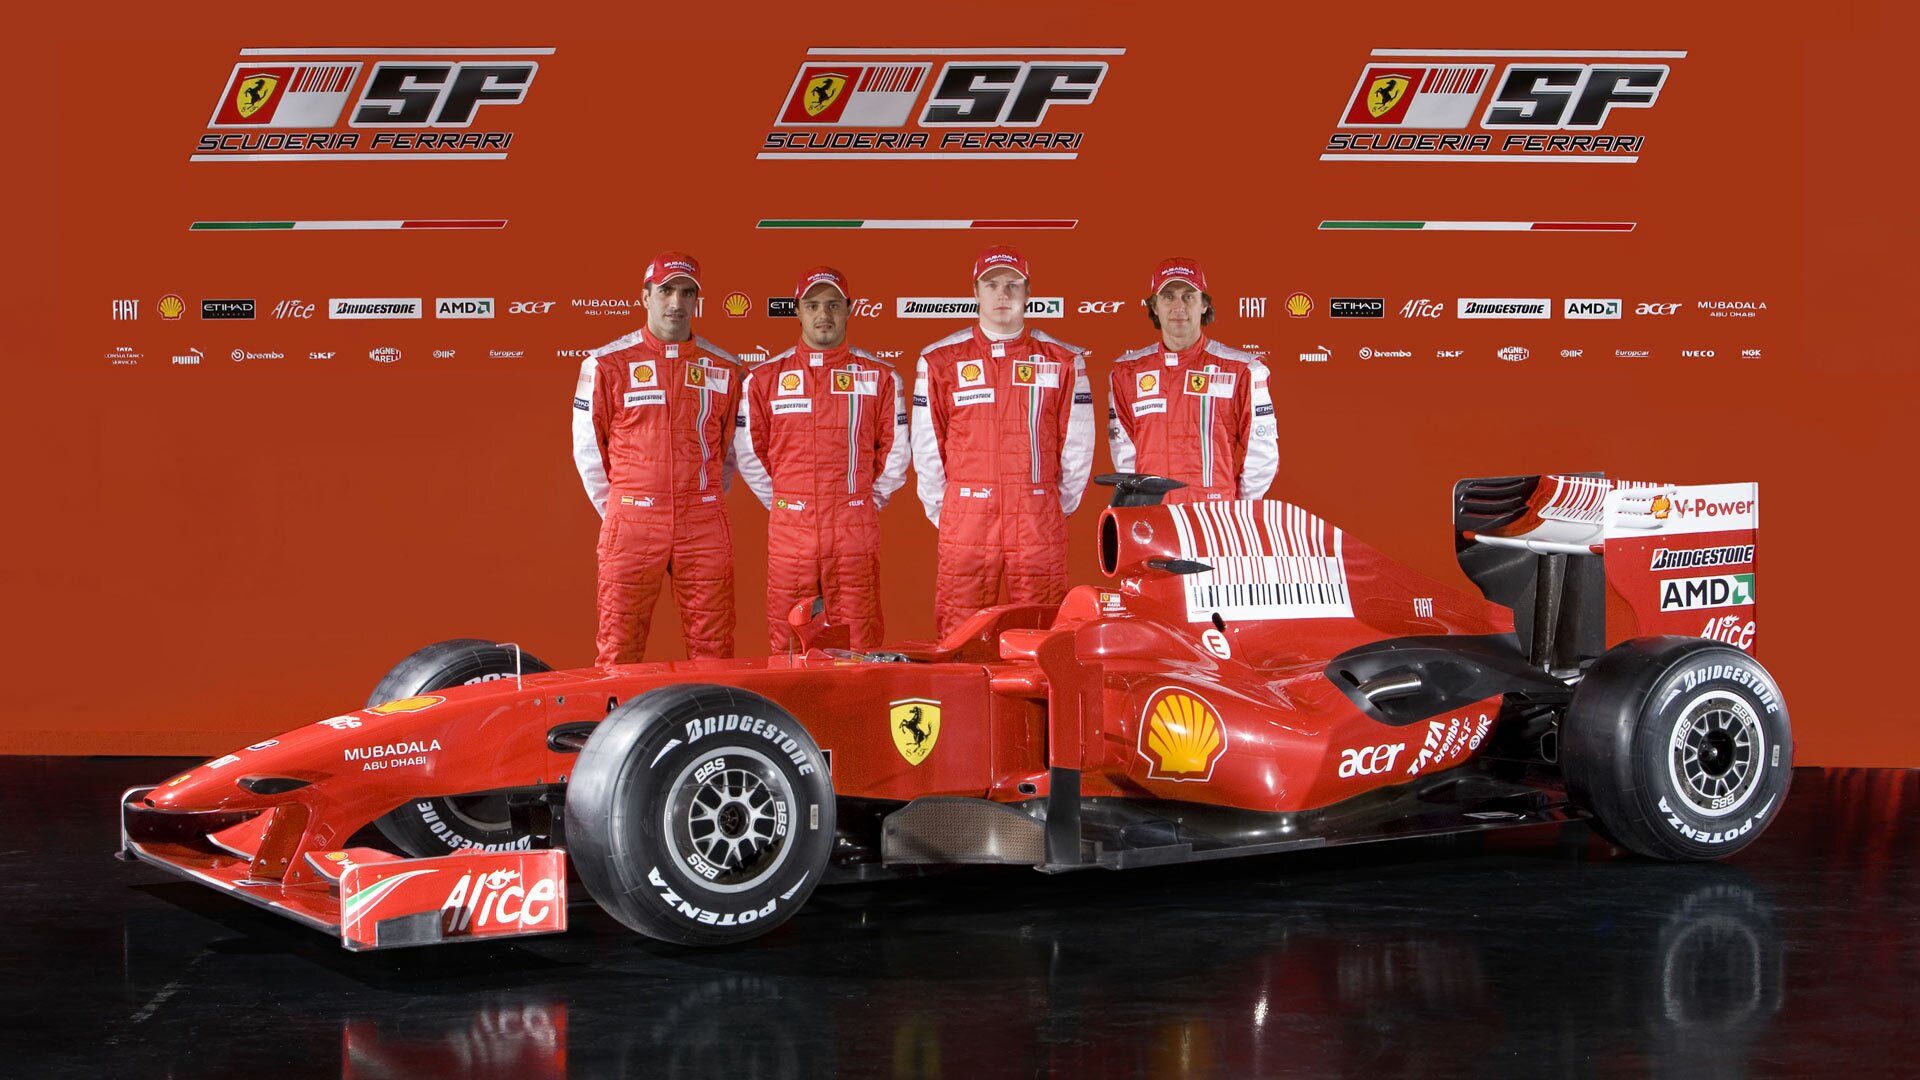 Try opening www.f1-site.com/wallpapers/2009 